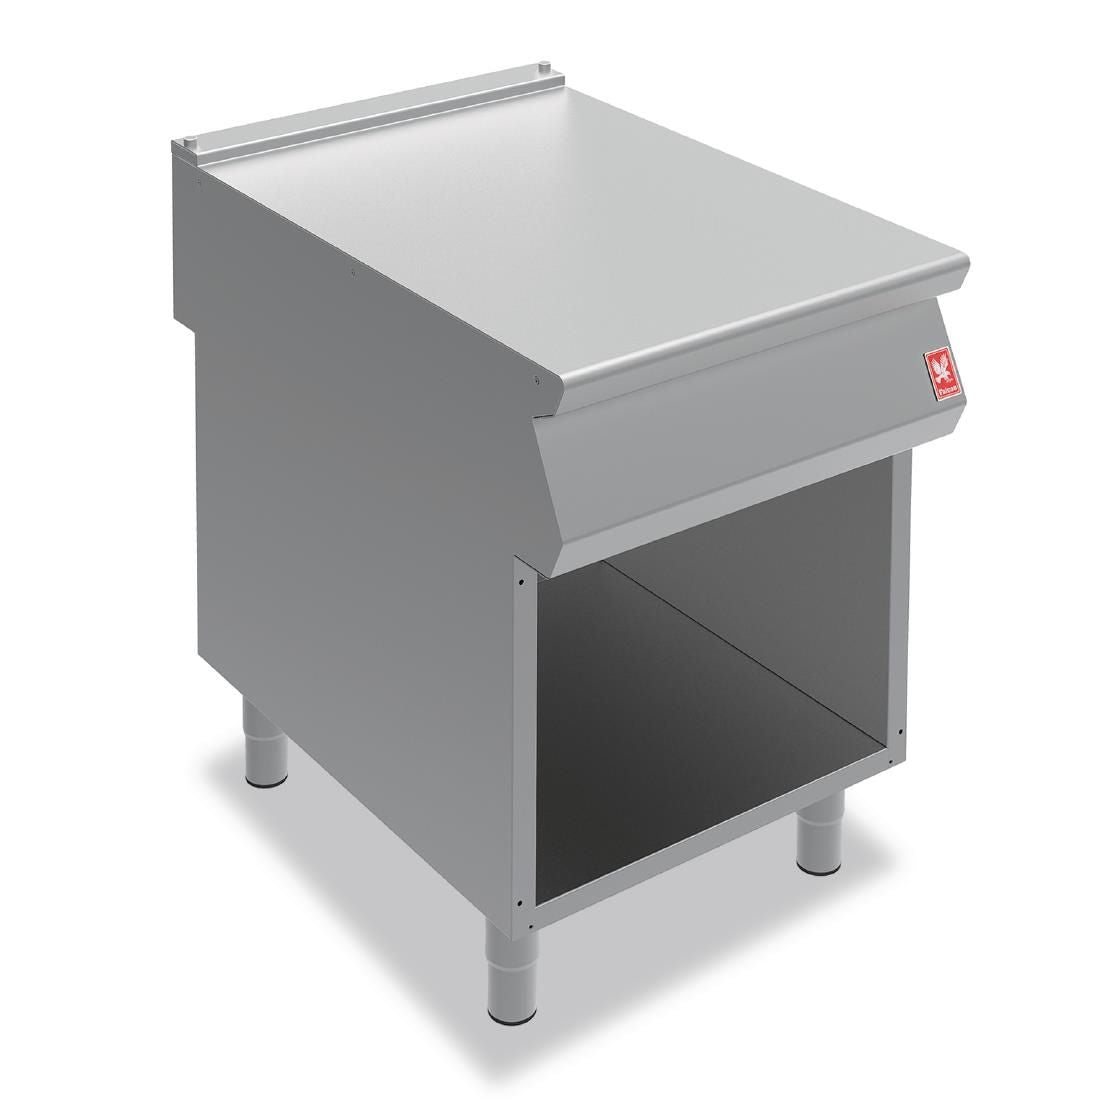 Falcon F900 Open Cabinet on Legs JD Catering Equipment Solutions Ltd